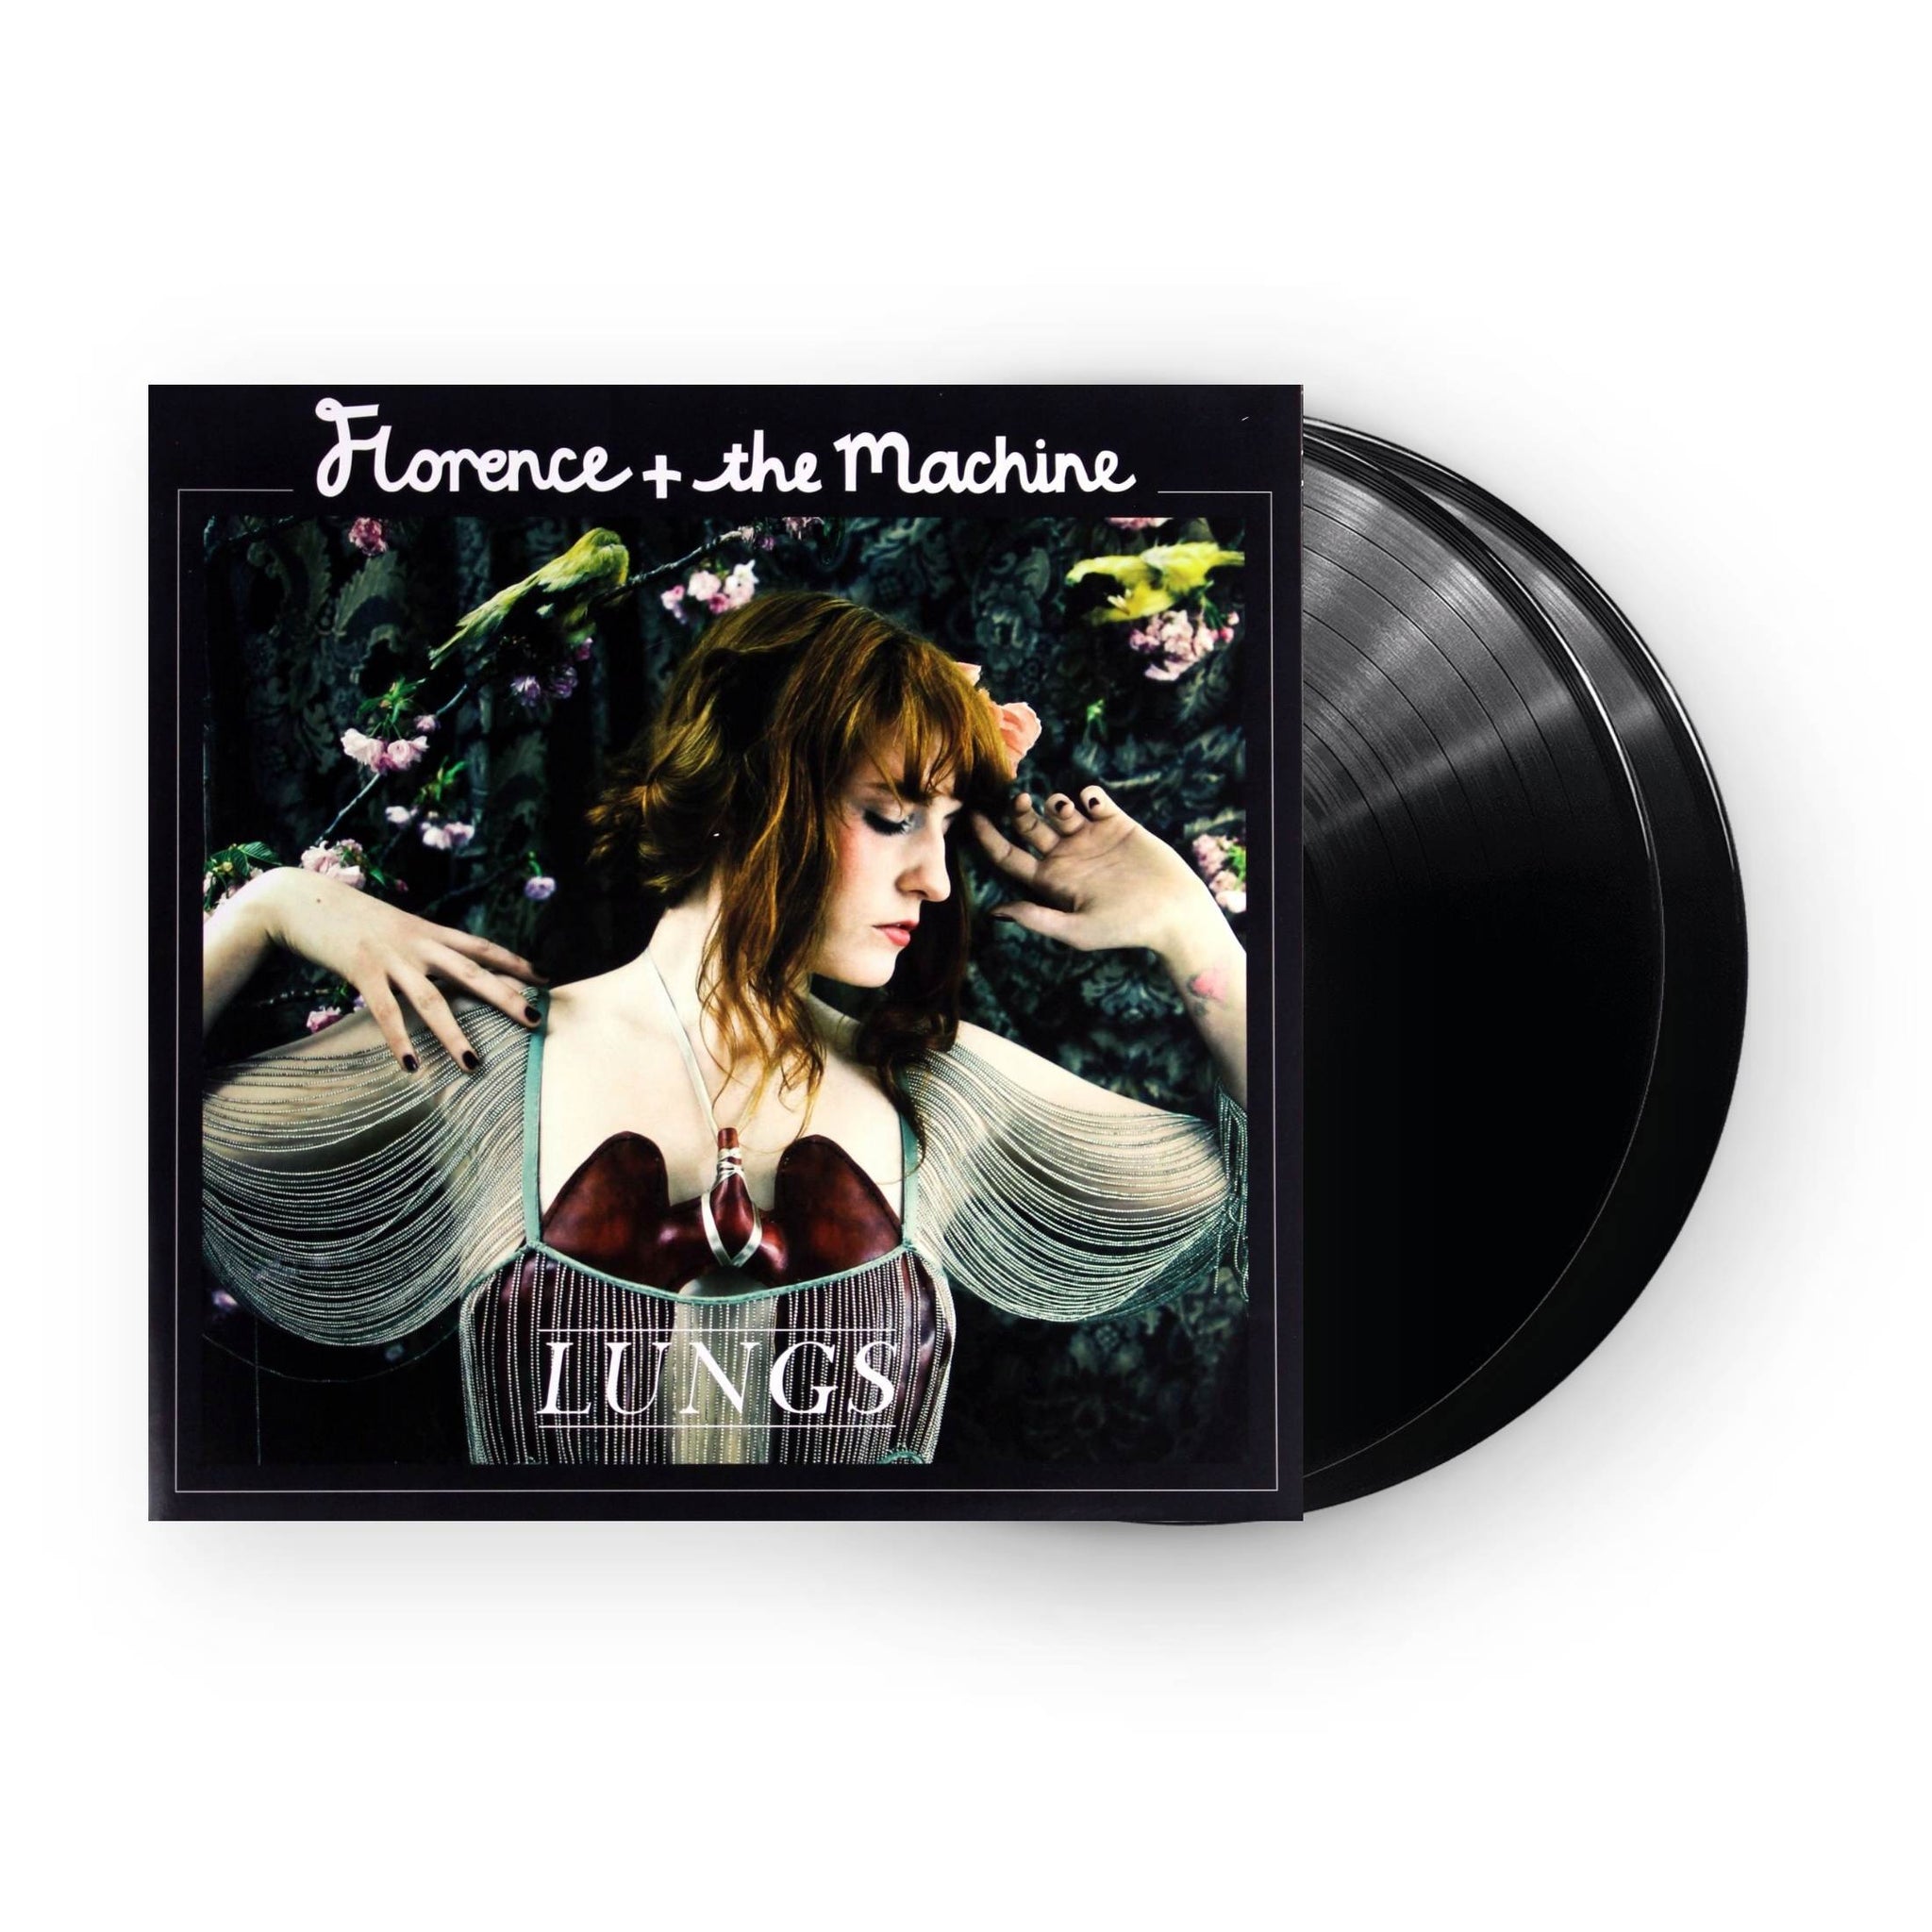 Florence And The Machine - Lungs 2xLP (Black Vinyl)